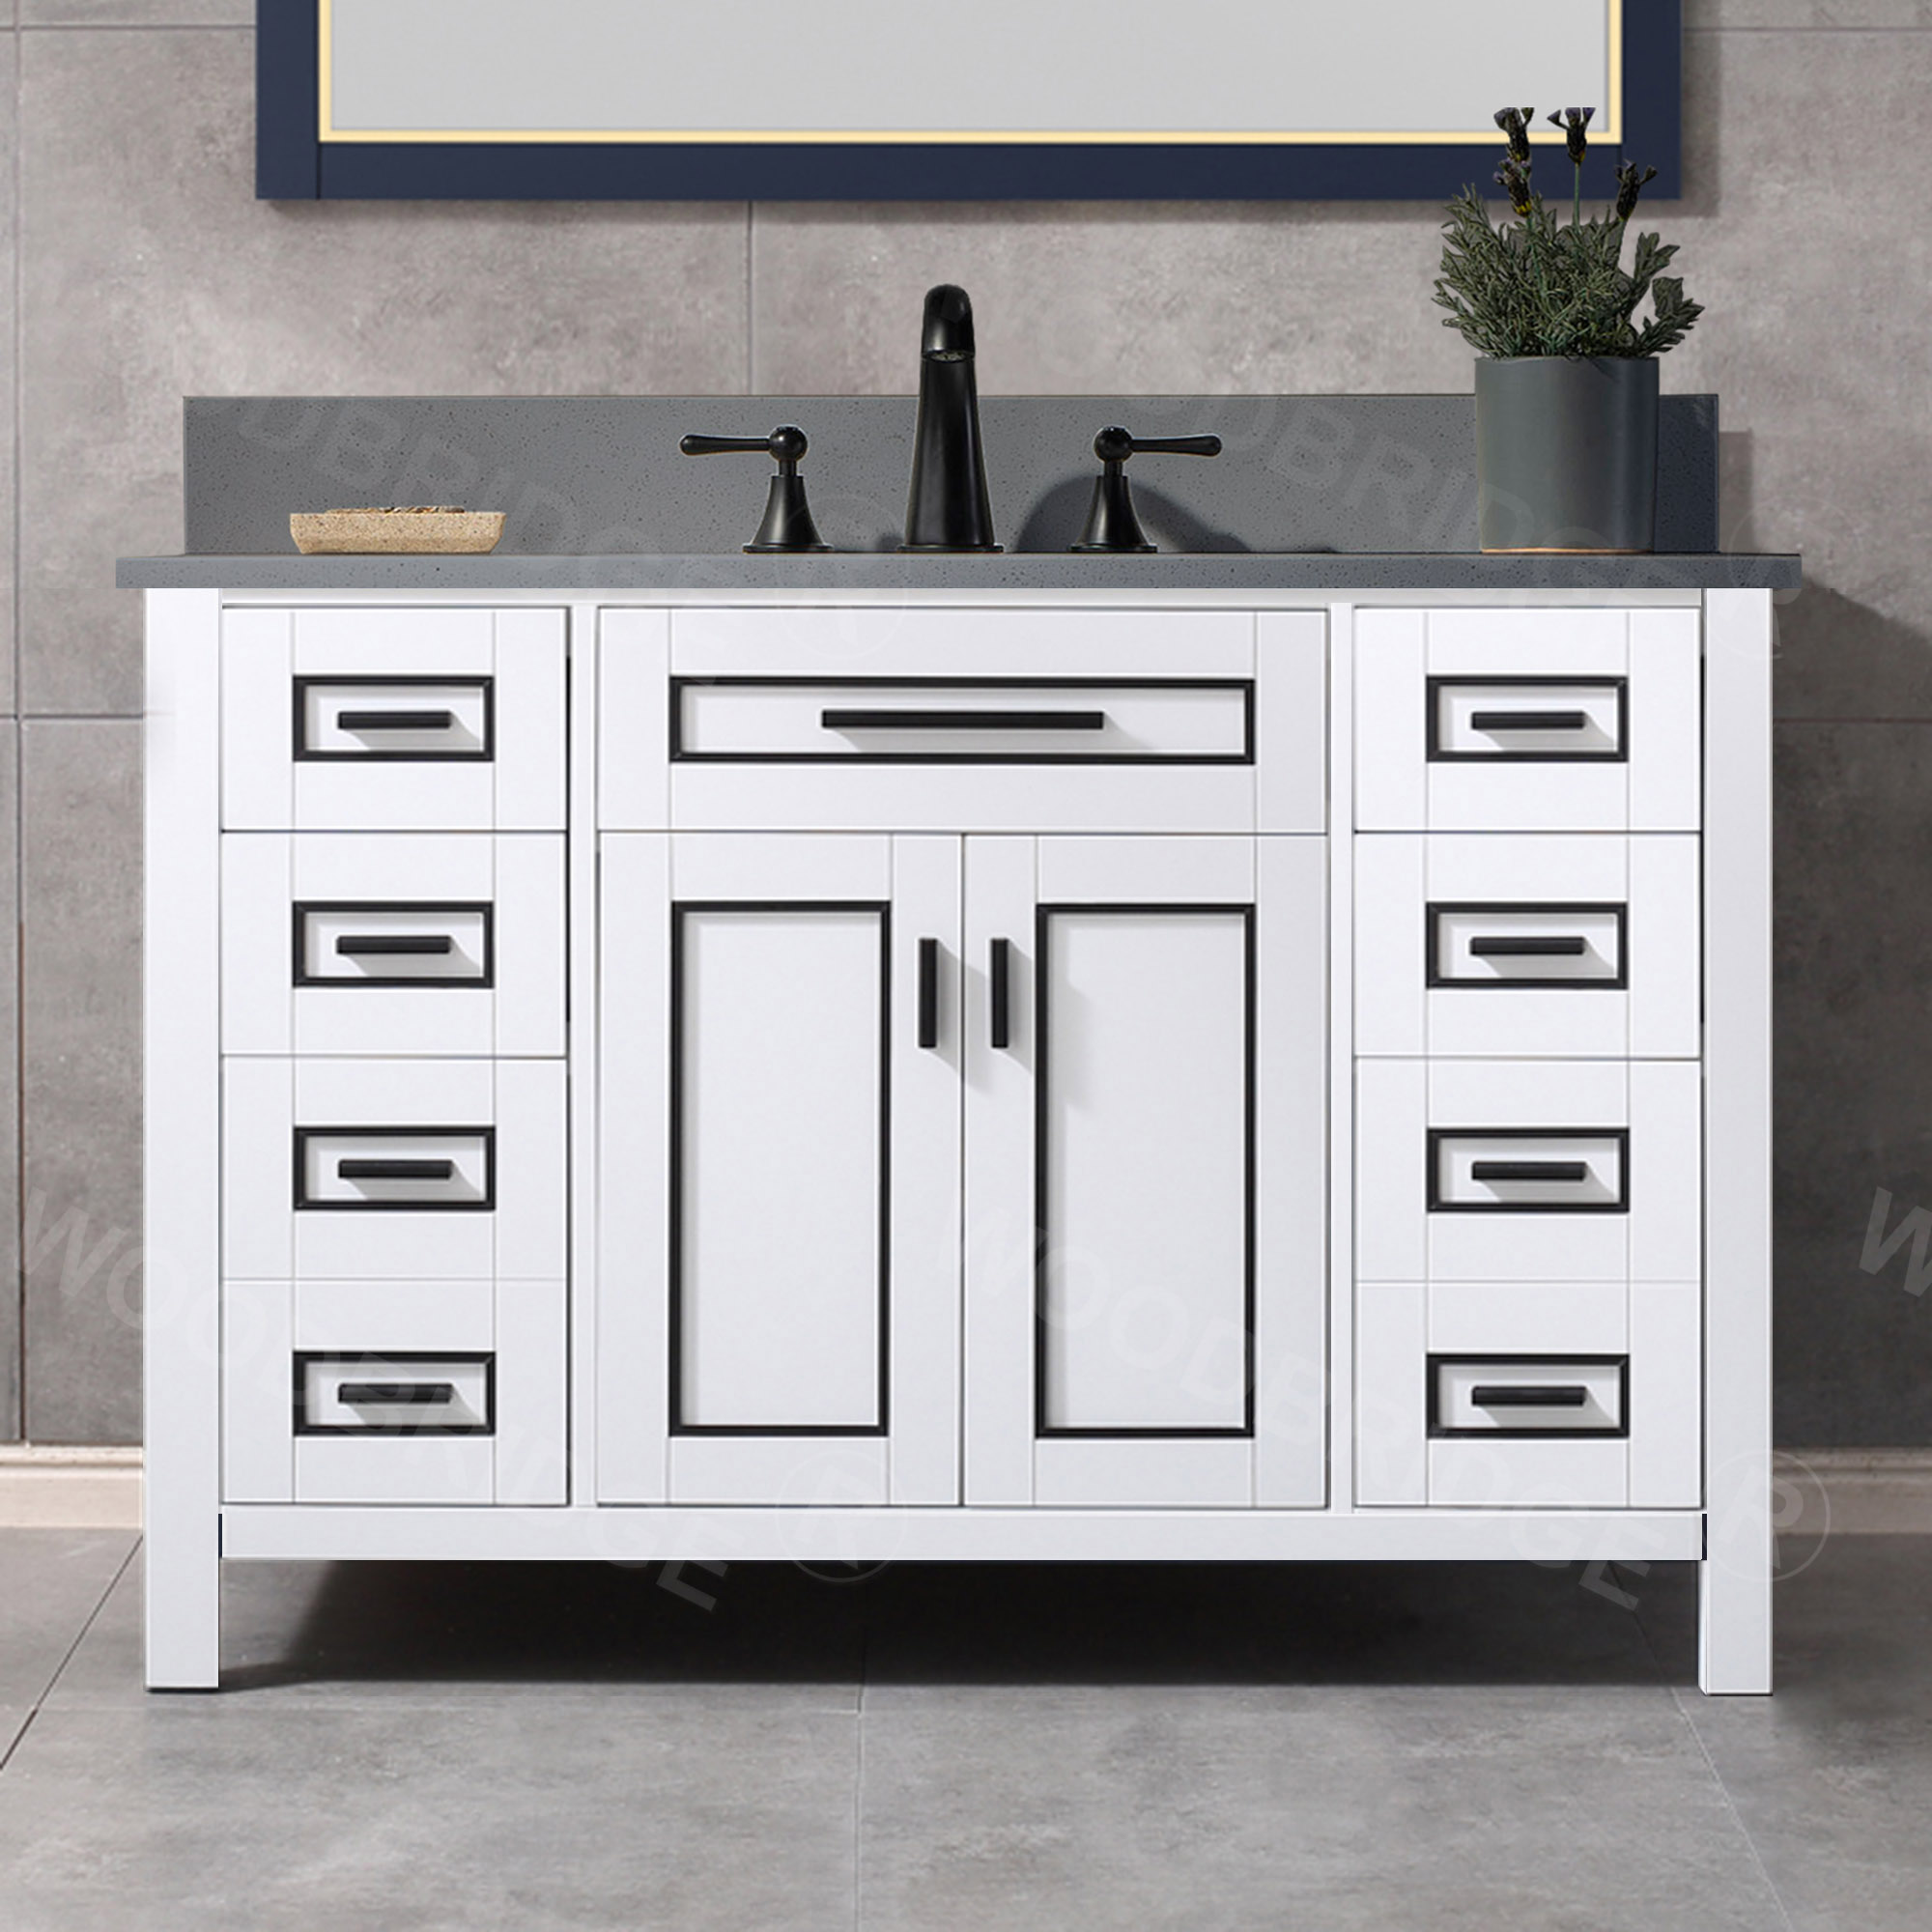 WOODBRIDGE Milan  49” Floor Mounted Single Basin Vanity Set with Solid Wood Cabinet in White and Engineered stone composite Vanity Top in Dark Gray with Pre-installed Undermount Rectangle Bathroom Sink in White and Pre-Drilled 3-Hole for 4-inch Centerset